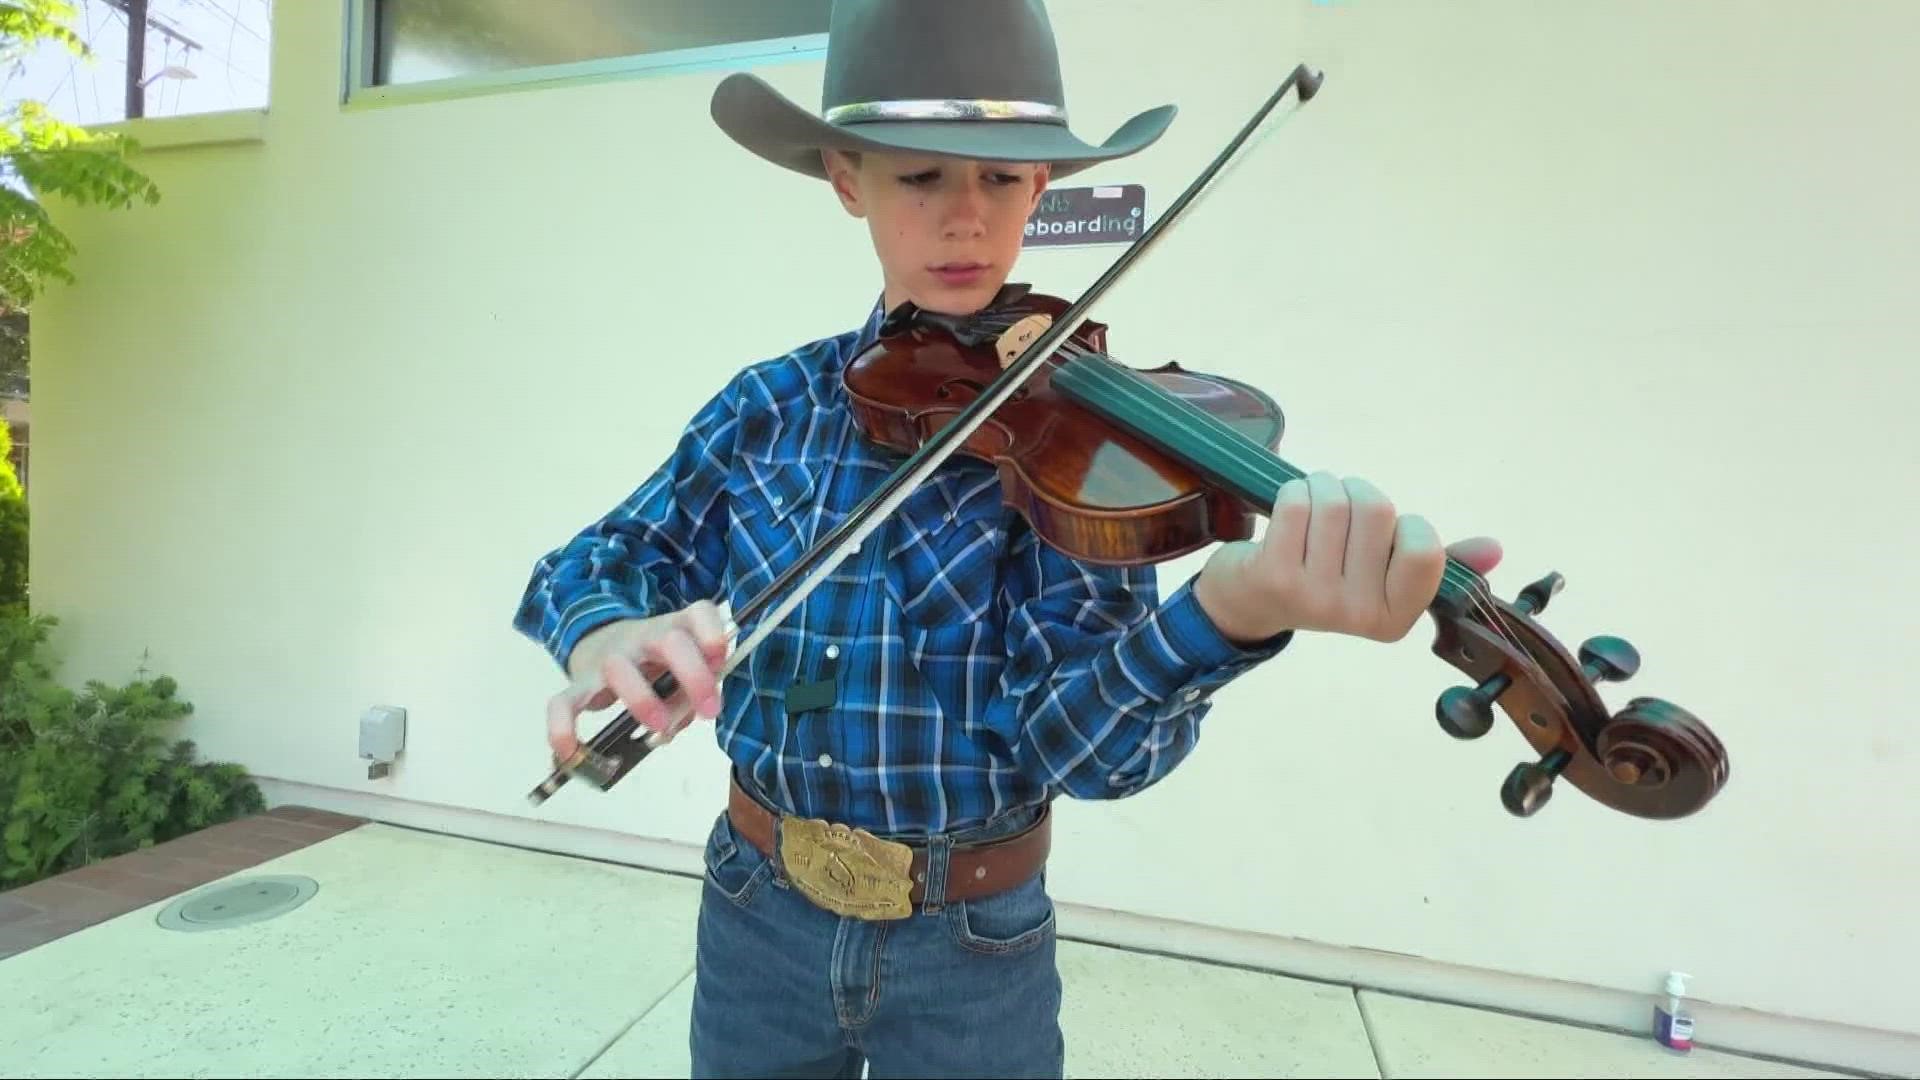 Eli Clegg talks about his experience and what goes into being a fiddler.